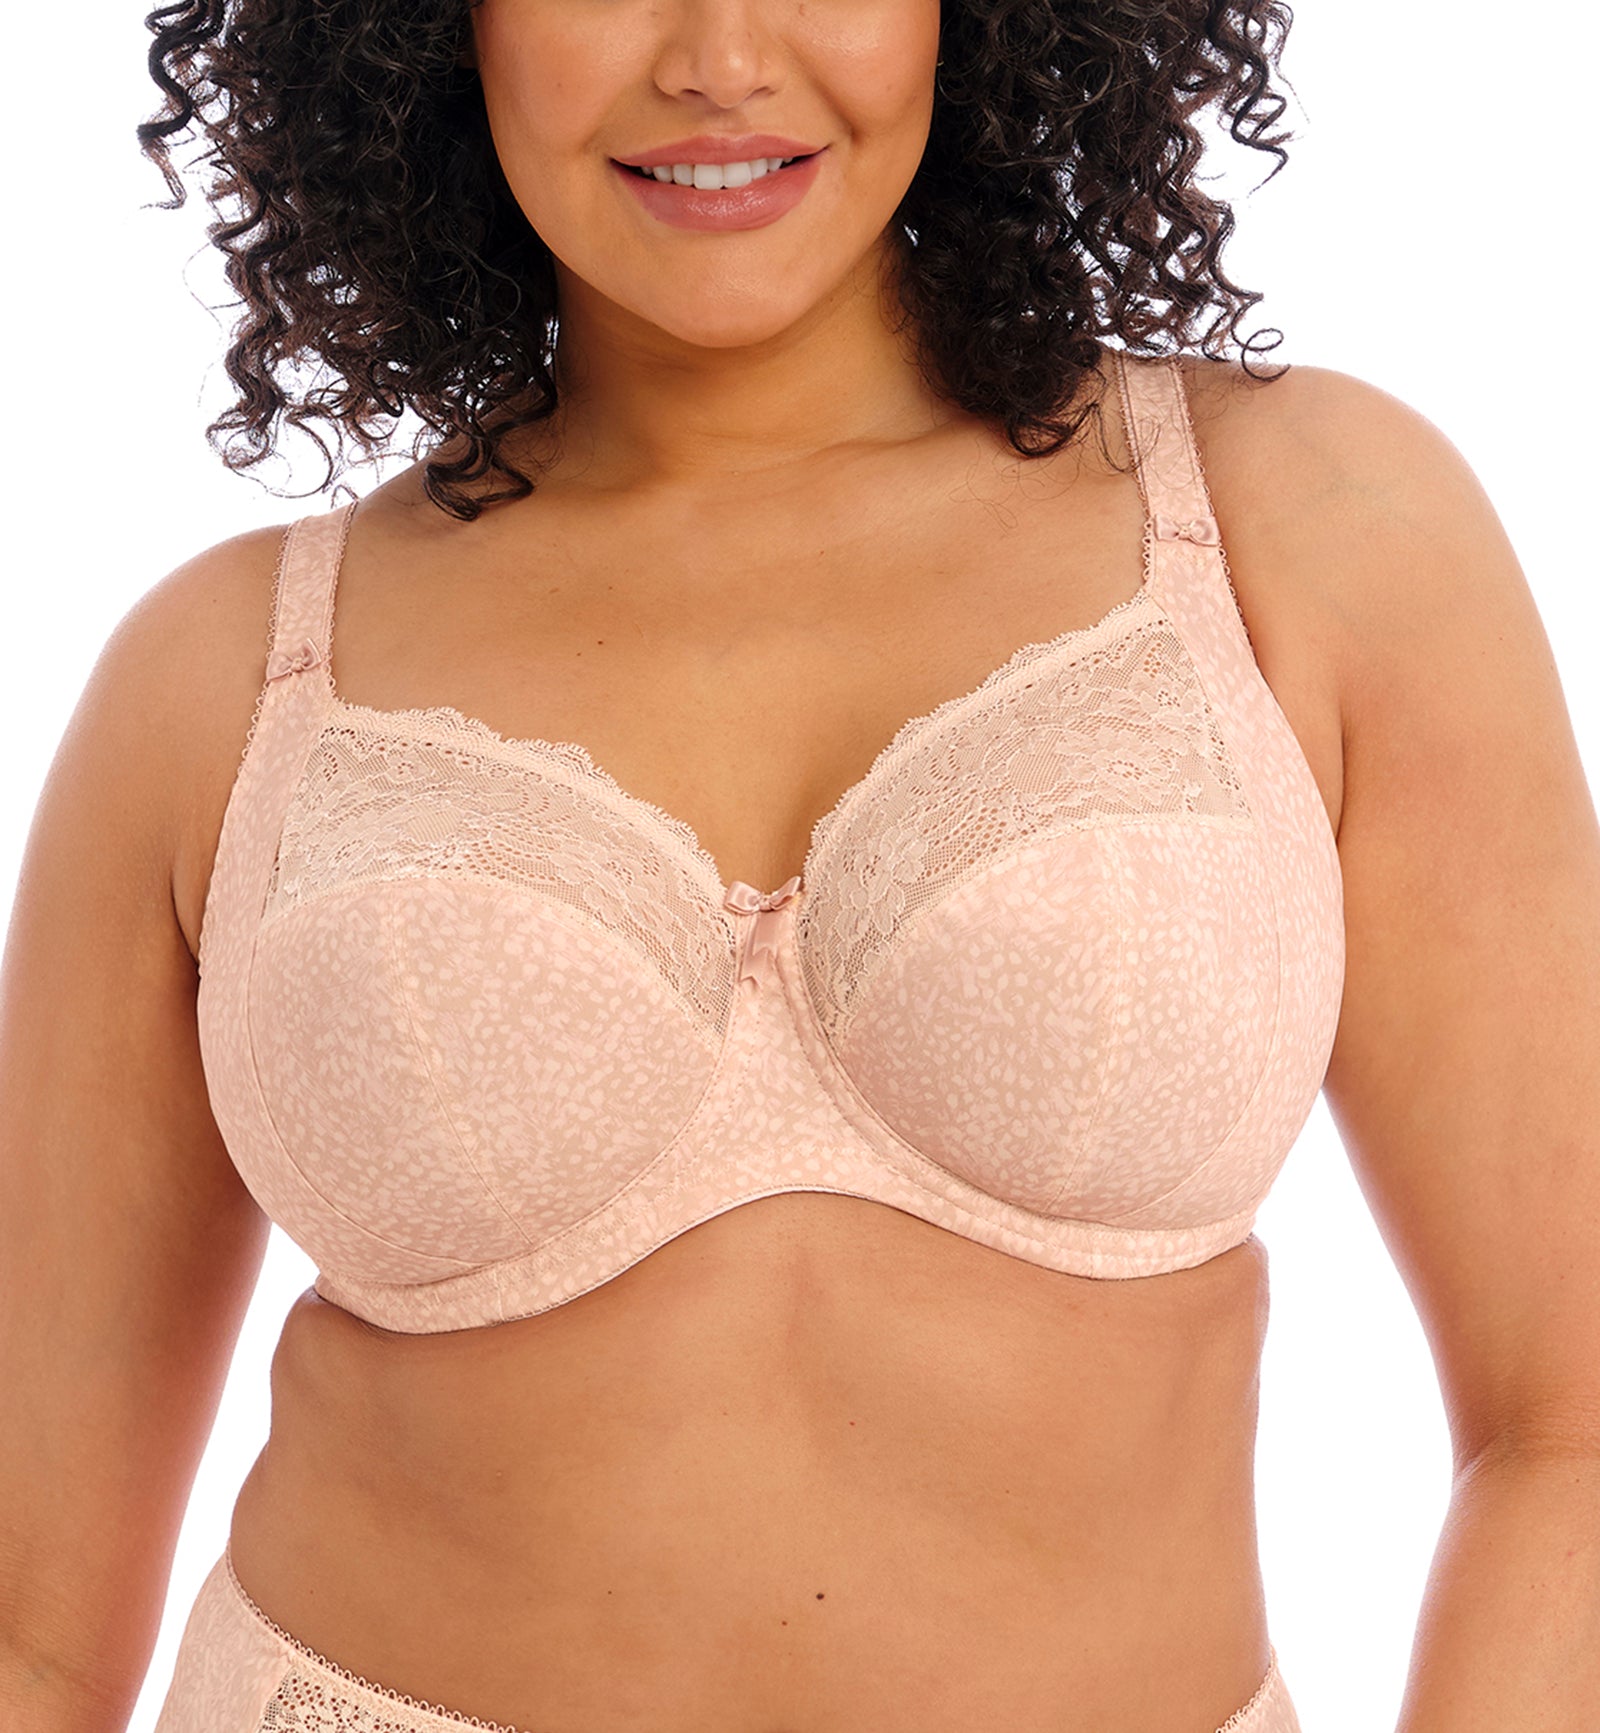 Elomi Morgan Stretch Lace Banded Underwire Bra (4110),32GG,Cameo Rose - Cameo Rose,32GG